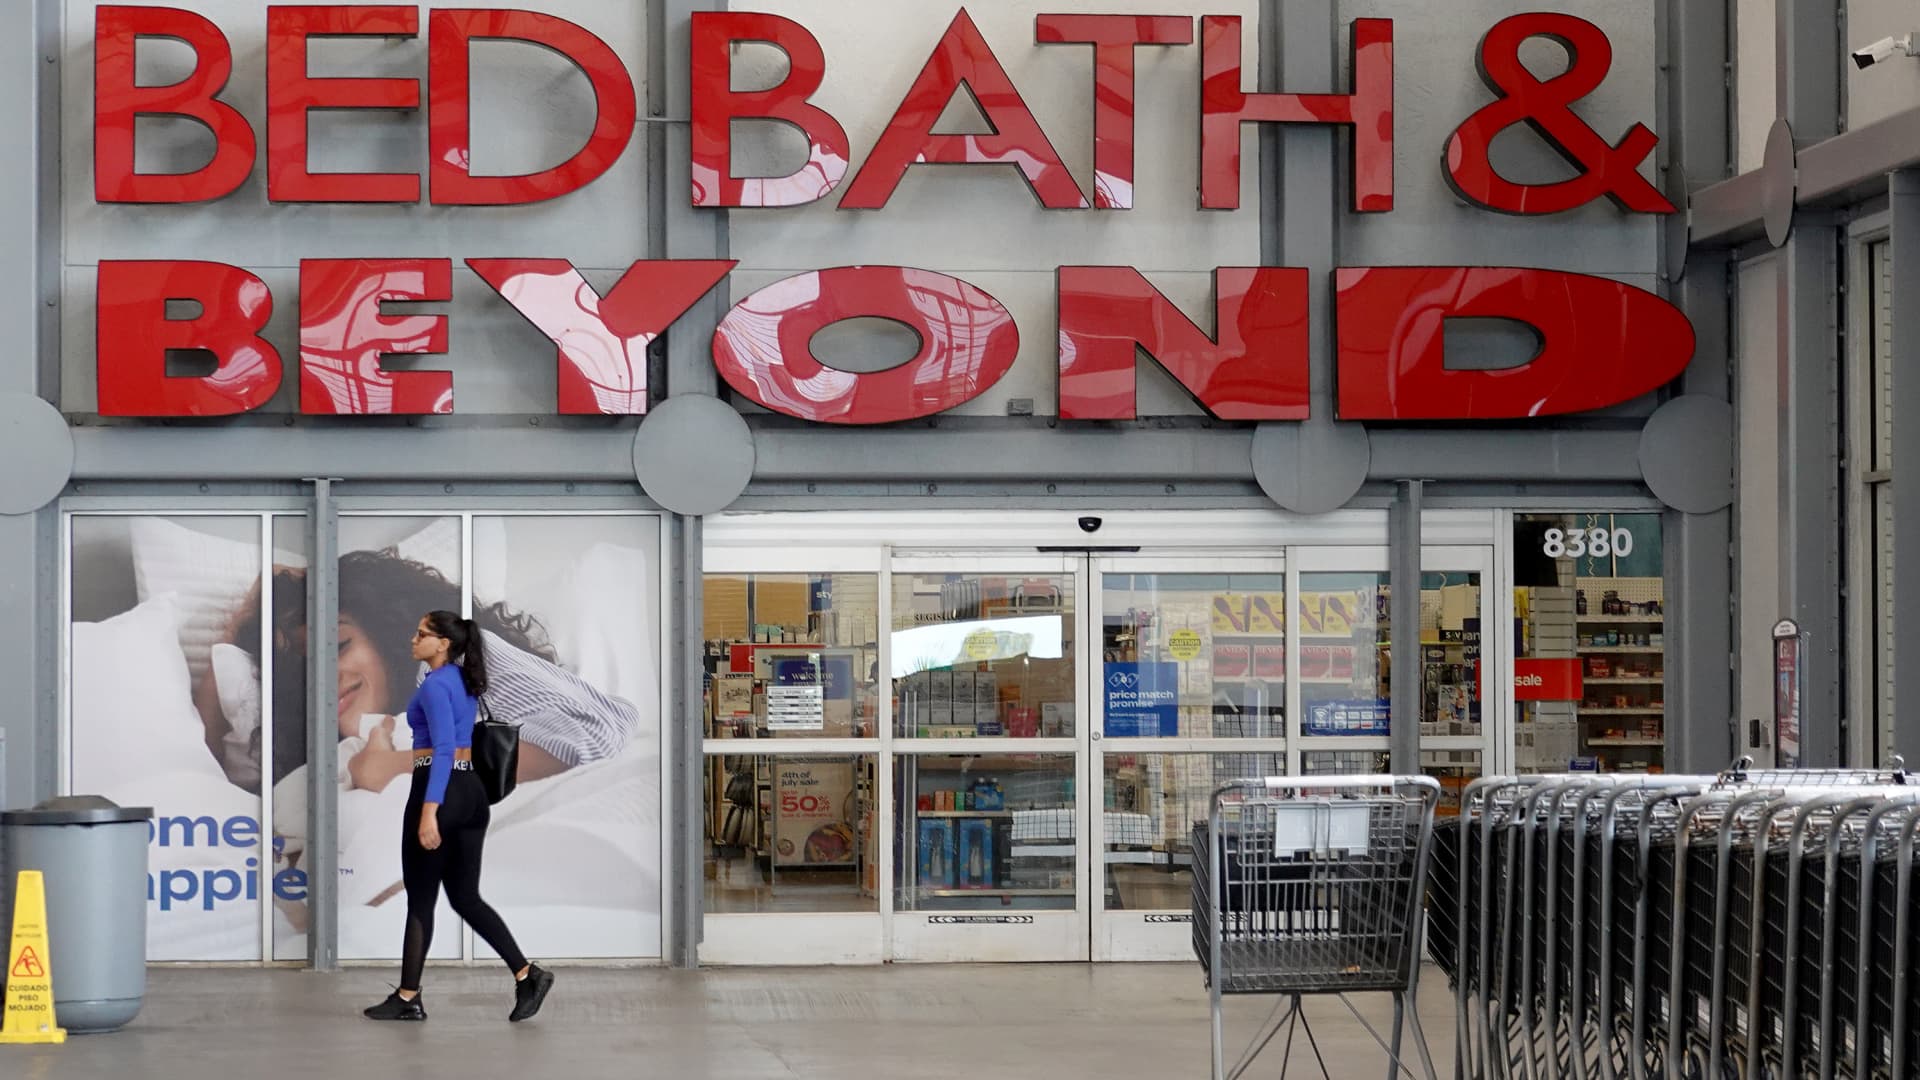 Bed Bath & Beyond shares plummet after company warns of potential bankruptcy